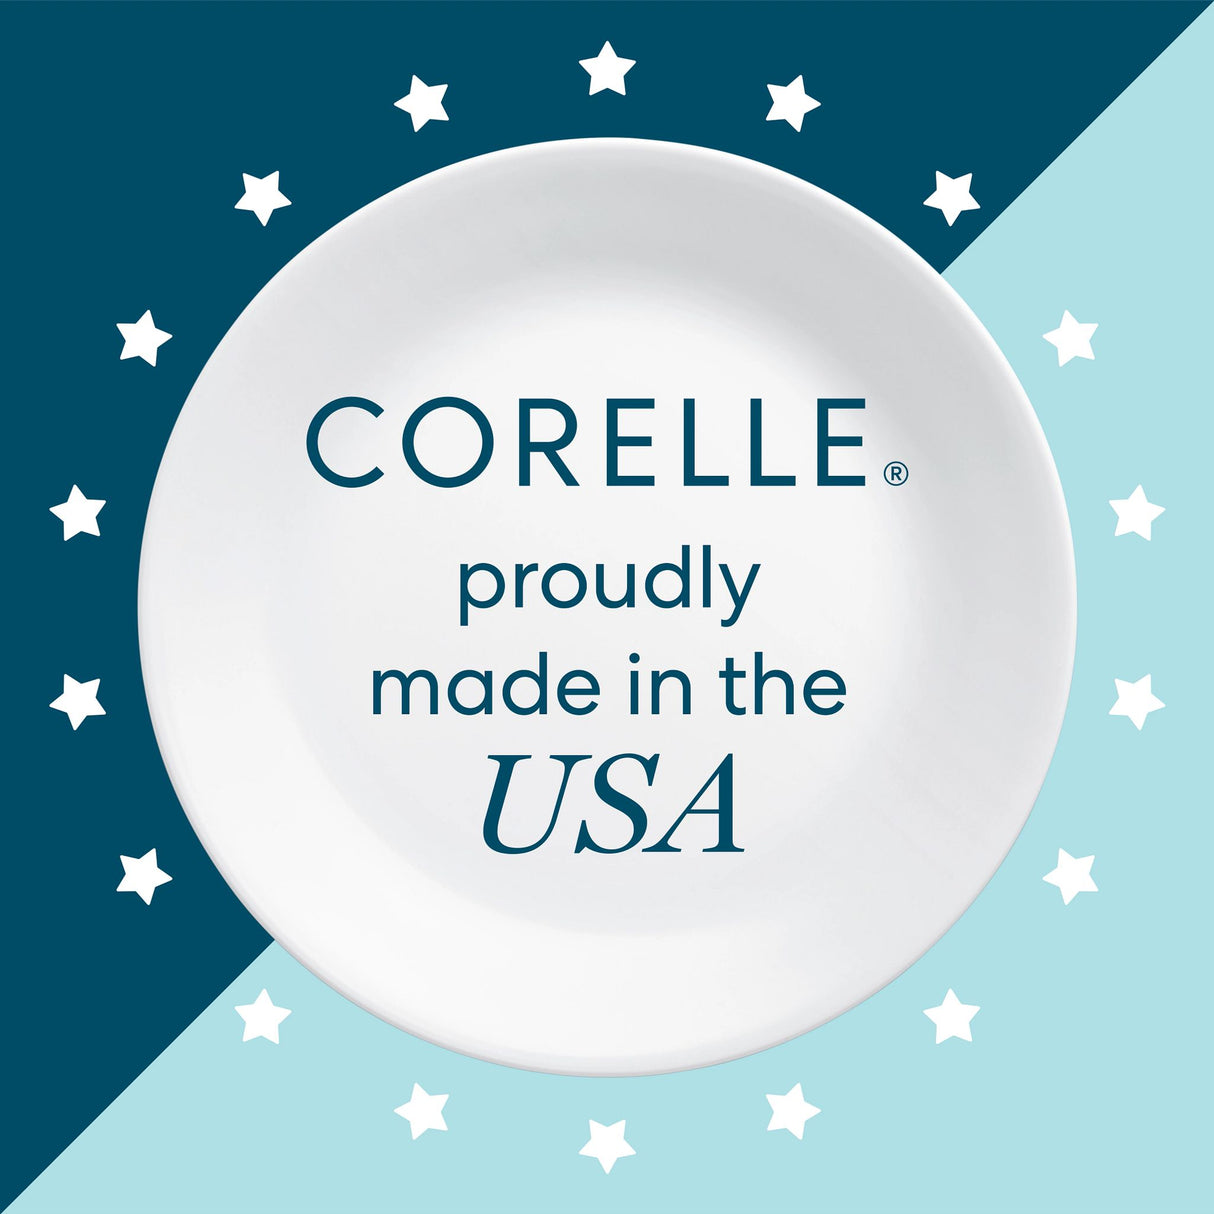  corelle proudly made in the usa text on white palte